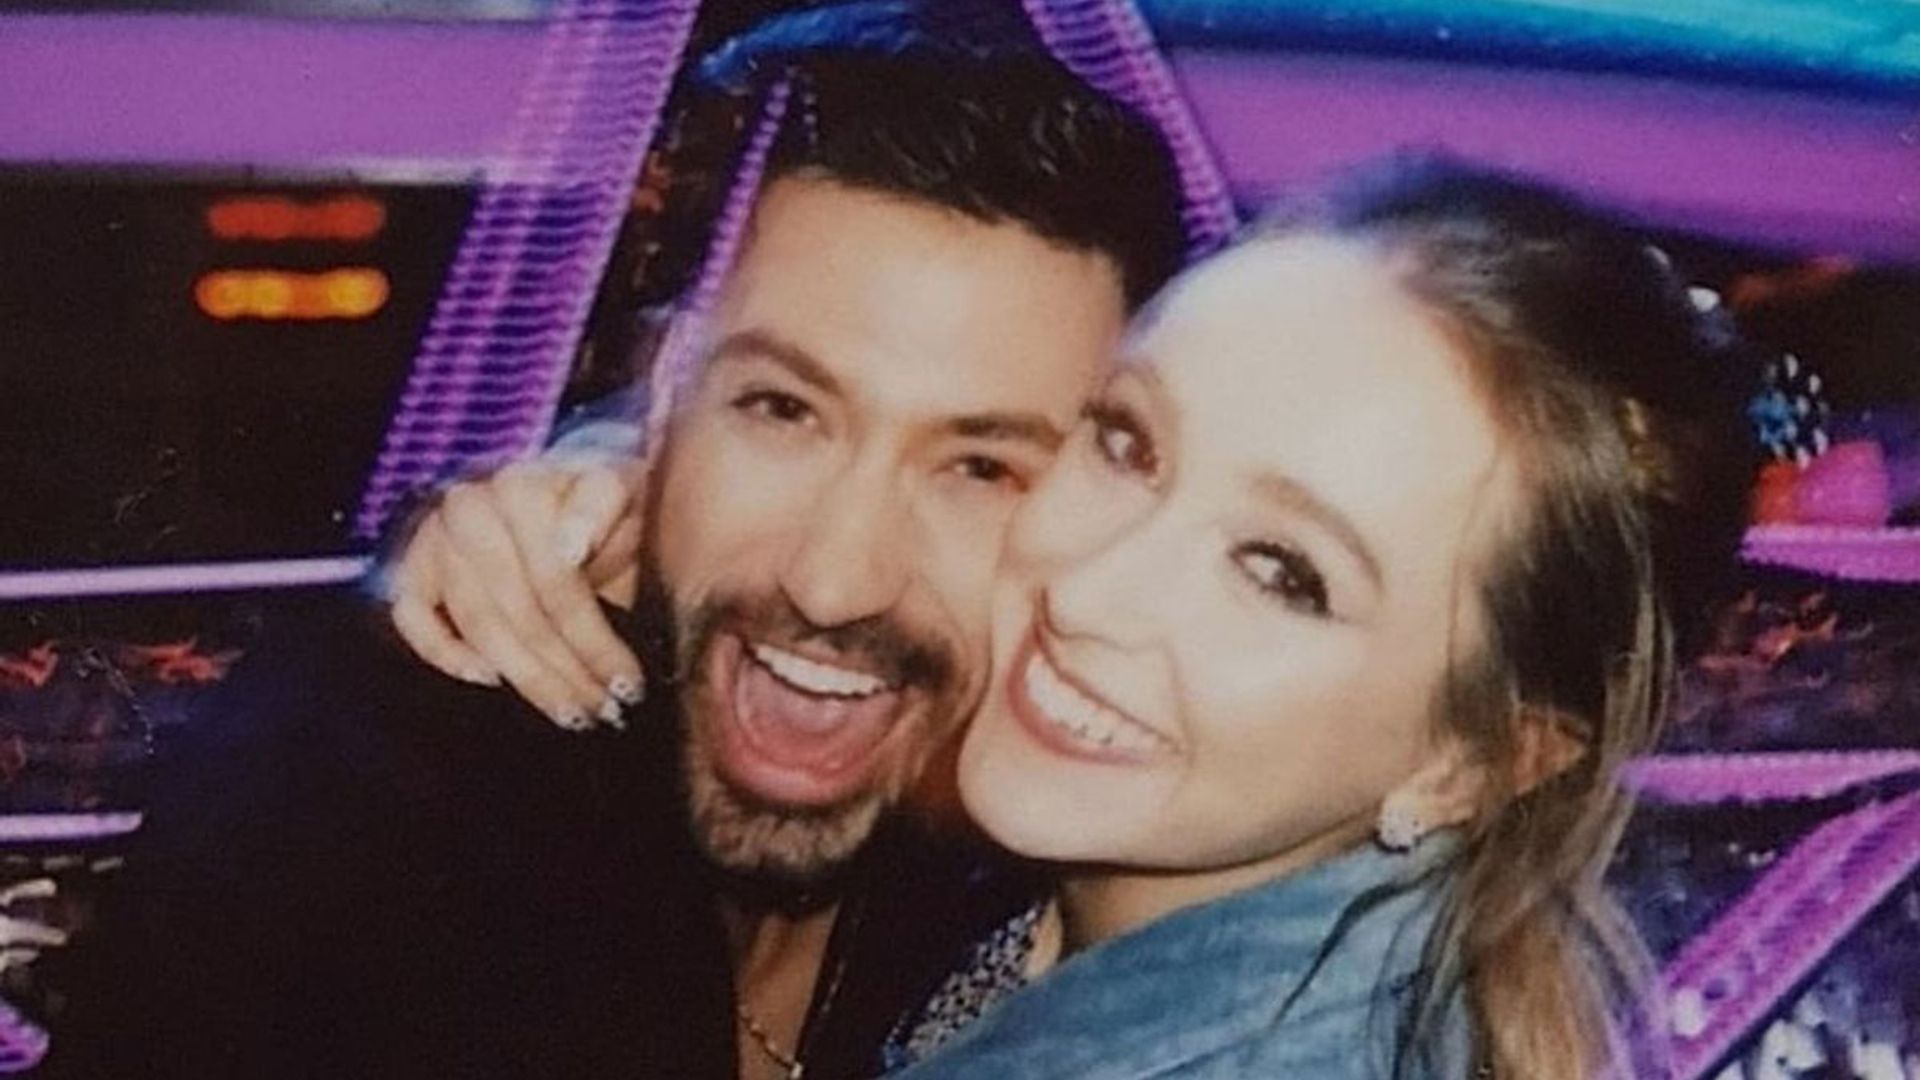 Rose Ayling-Ellis attempts to hand feed Giovanni Pernice in hilarious video ahead of tour start